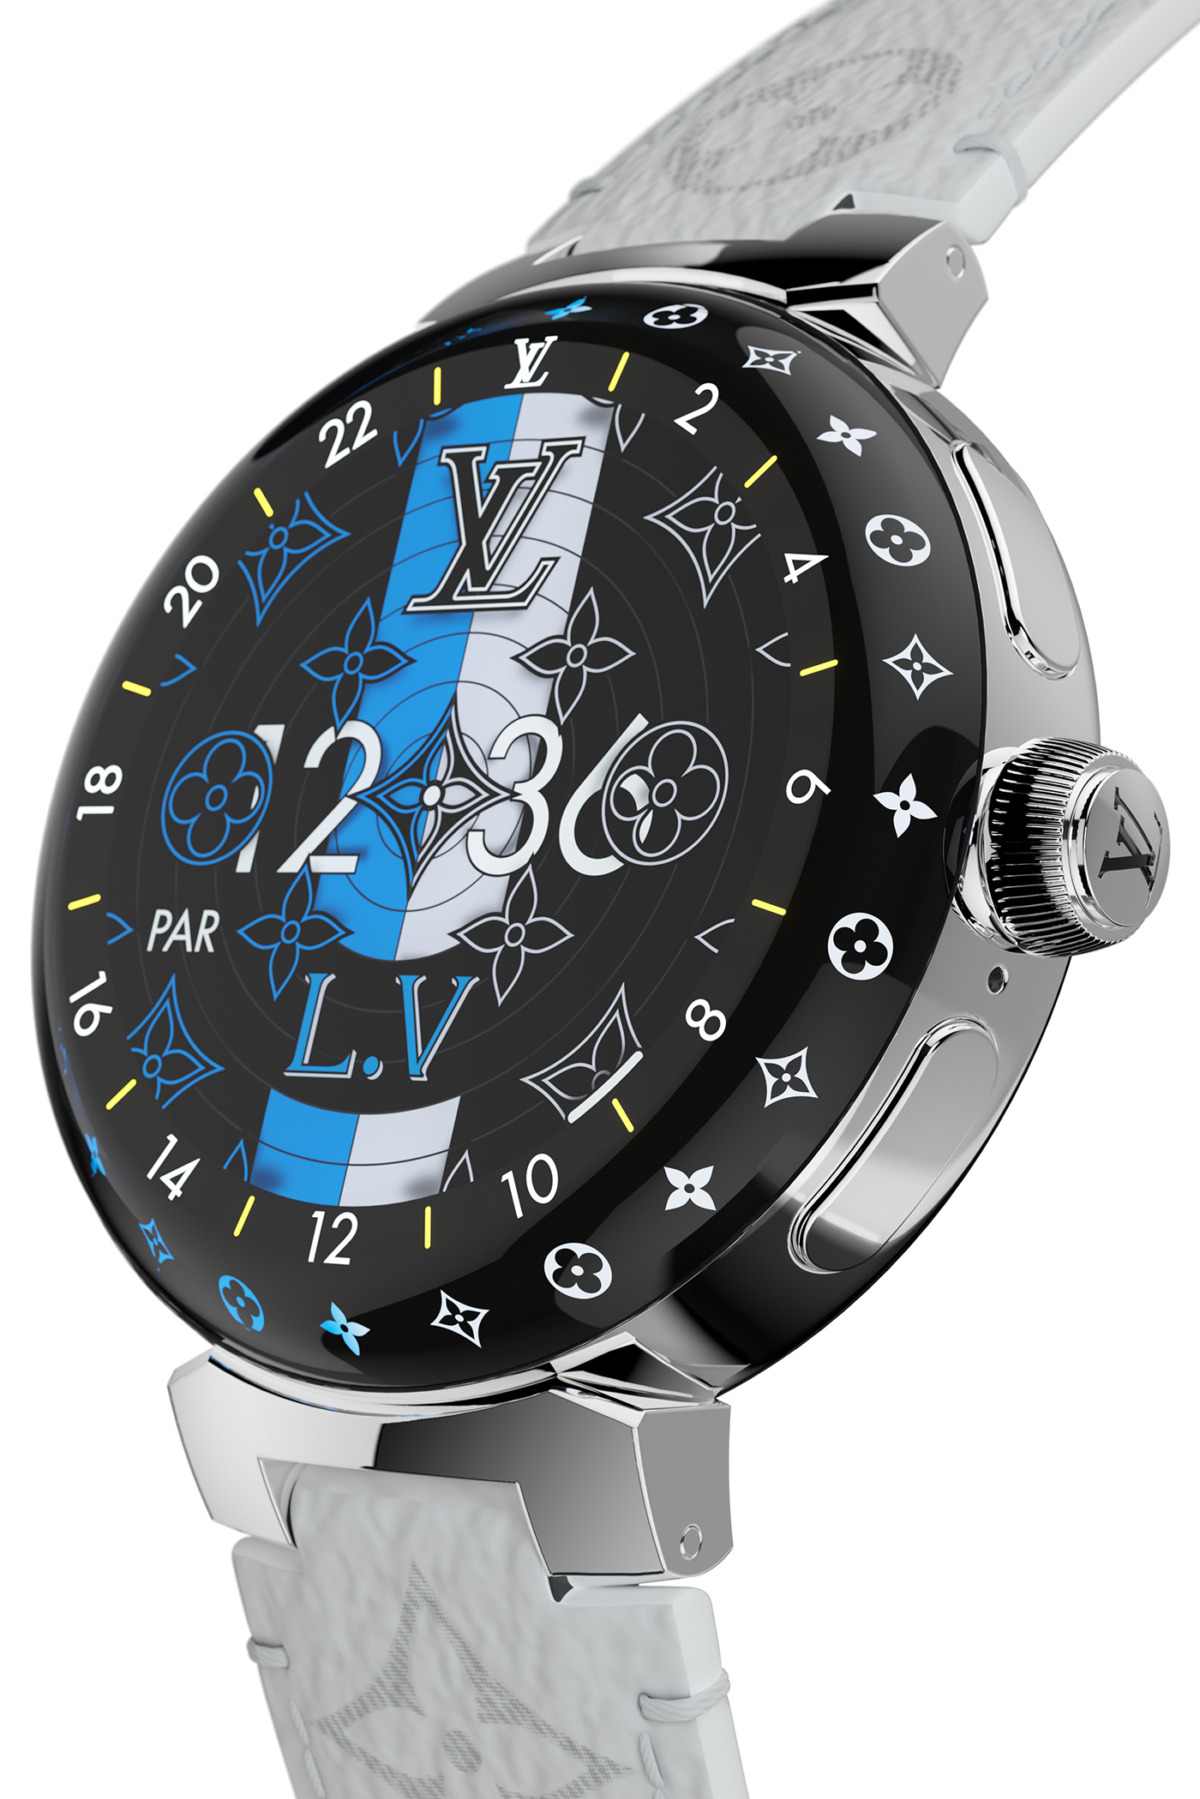 From the Editor: My Thoughts on the New Louis Vuitton Tambour. I Call a  Spade a Spade. — WATCH COLLECTING LIFESTYLE